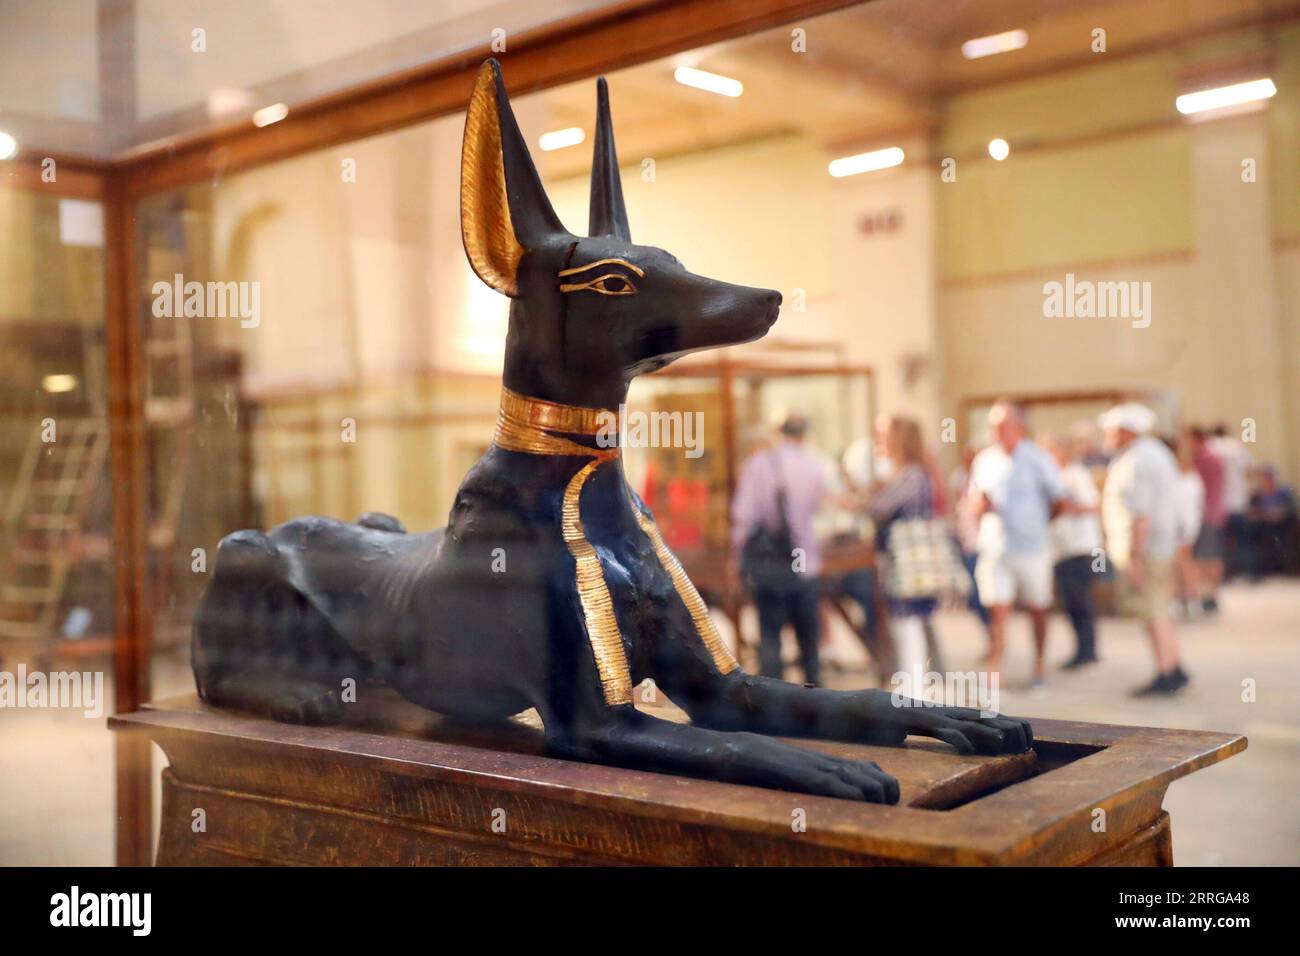 220515 -- CAIRO, May 15, 2022 -- Photo taken on May 14, 2022 shows the statue of god Anubis discovered at the tomb of king Tutankhamun, at the Egyptian Museum in Cairo, Egypt. As a funerary deity, Anubis is associated with mummification, funerary rituals, and the cemetery in ancient Egyptian myth, usually depicted as a black canine, or a man with canine head. It can be found at large numbers of pharaonic antiquities at the world-known Egyptian Museum.  EGYPT-CAIRO-EGYPTIAN MUSEUM-ANUBIS SuixXiankai PUBLICATIONxNOTxINxCHN Stock Photo